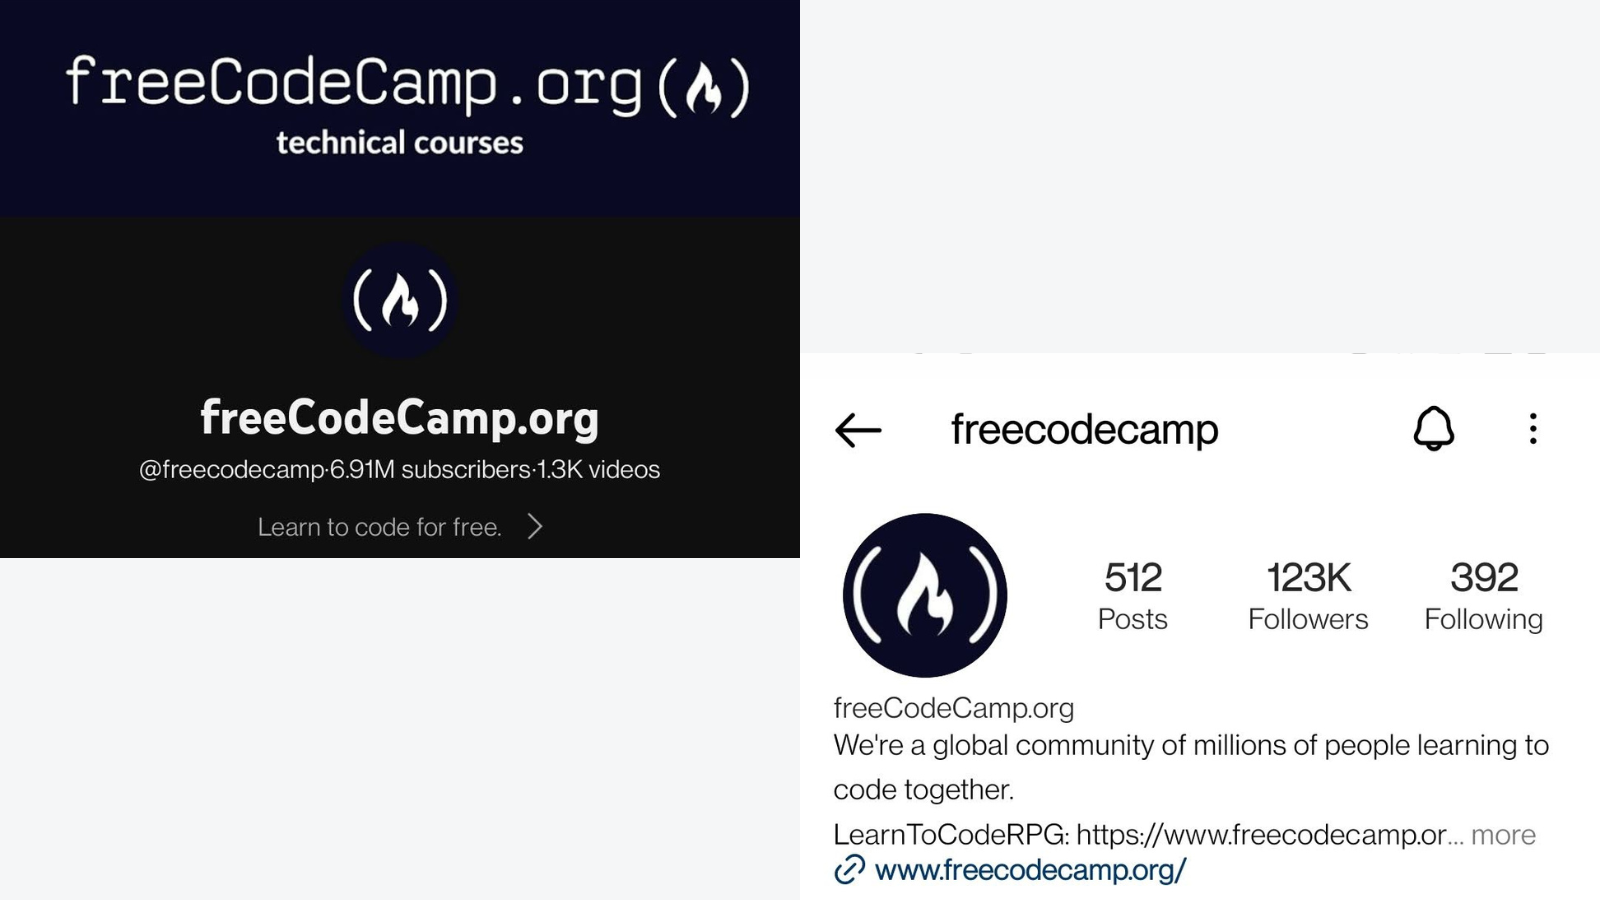 freeCodeCamp's YouTube and Instagram profiles using compact number format.